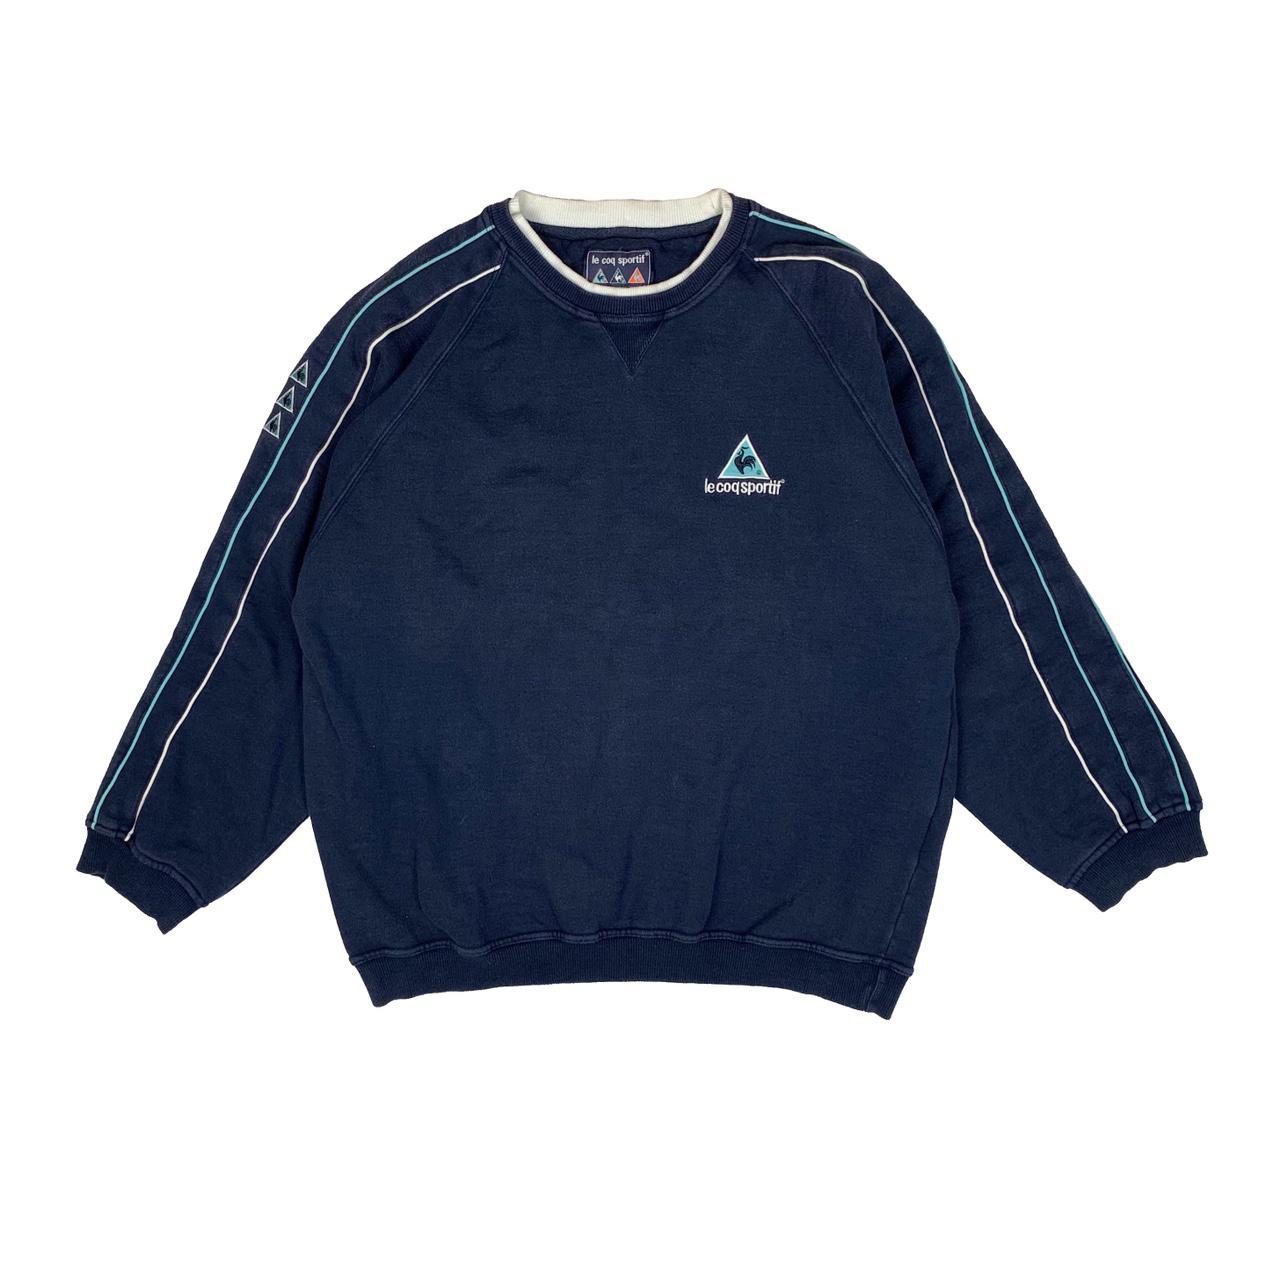 Product Image 1 - Vintage Le Coq Sportif embroidered